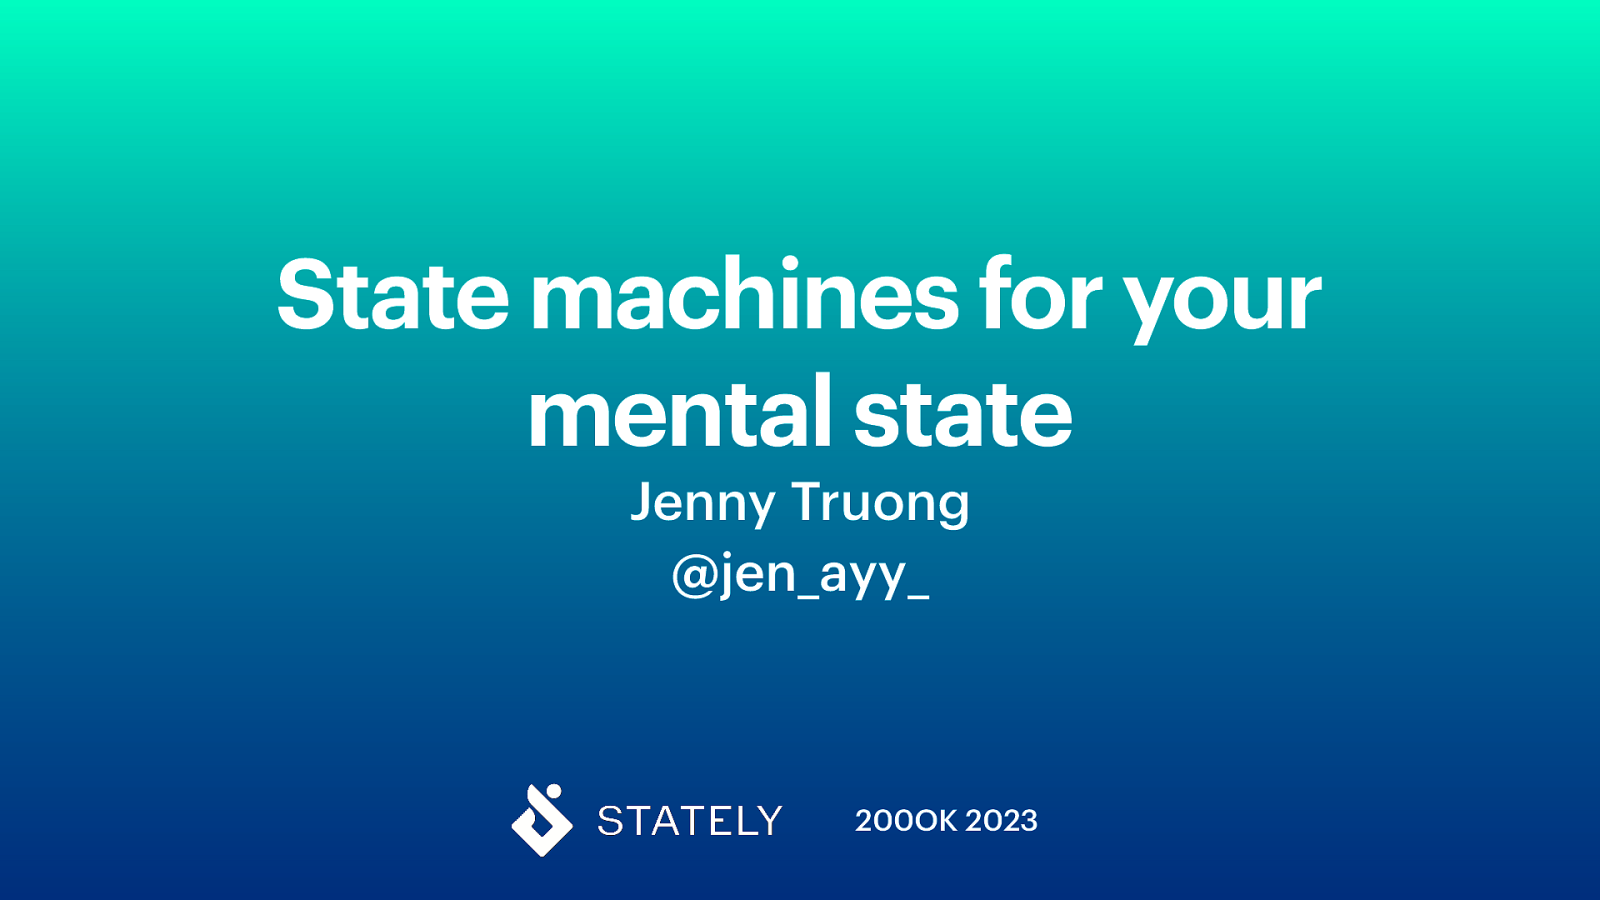 State machines for your mental state